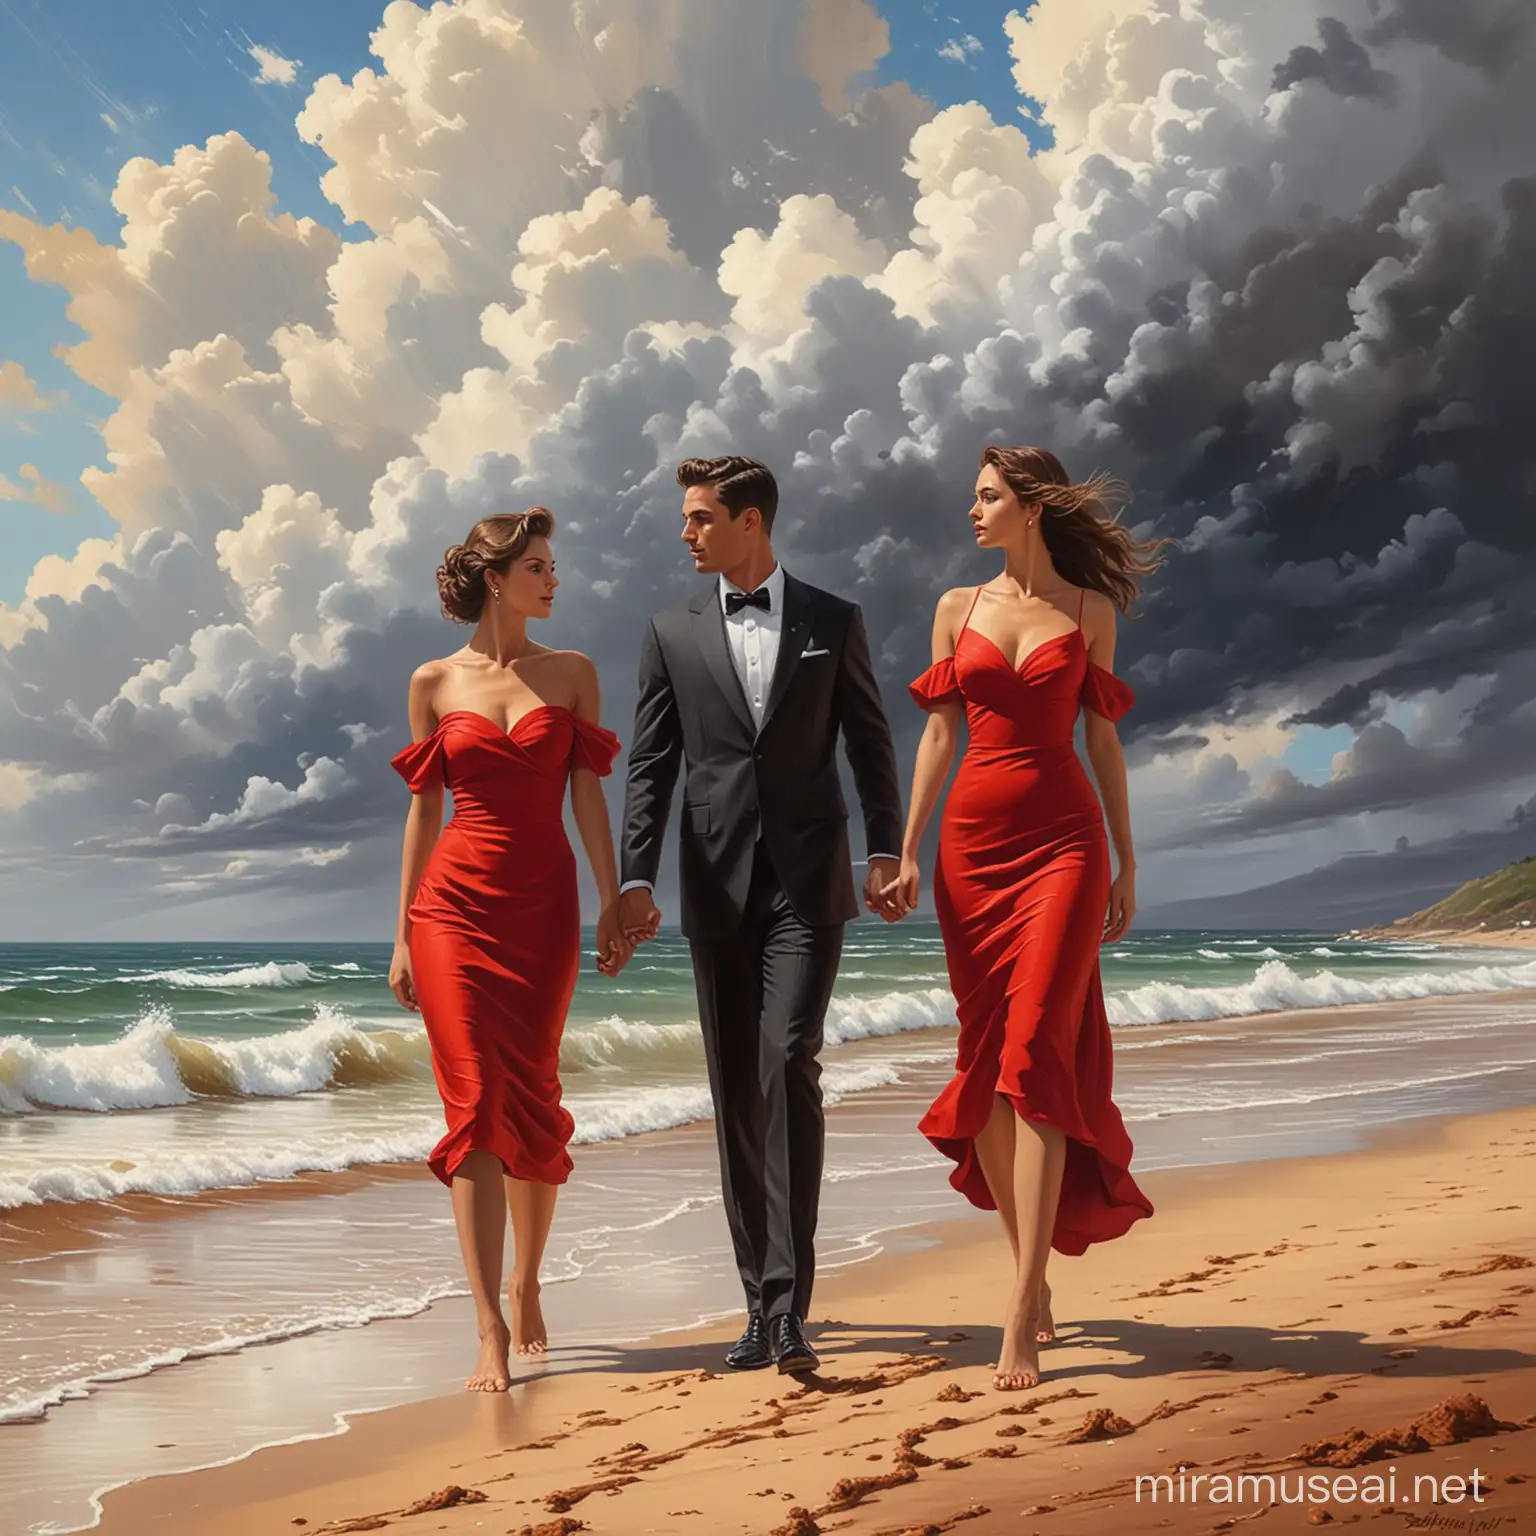 Elegant Couples at Brown Sand Beach with Anticipation